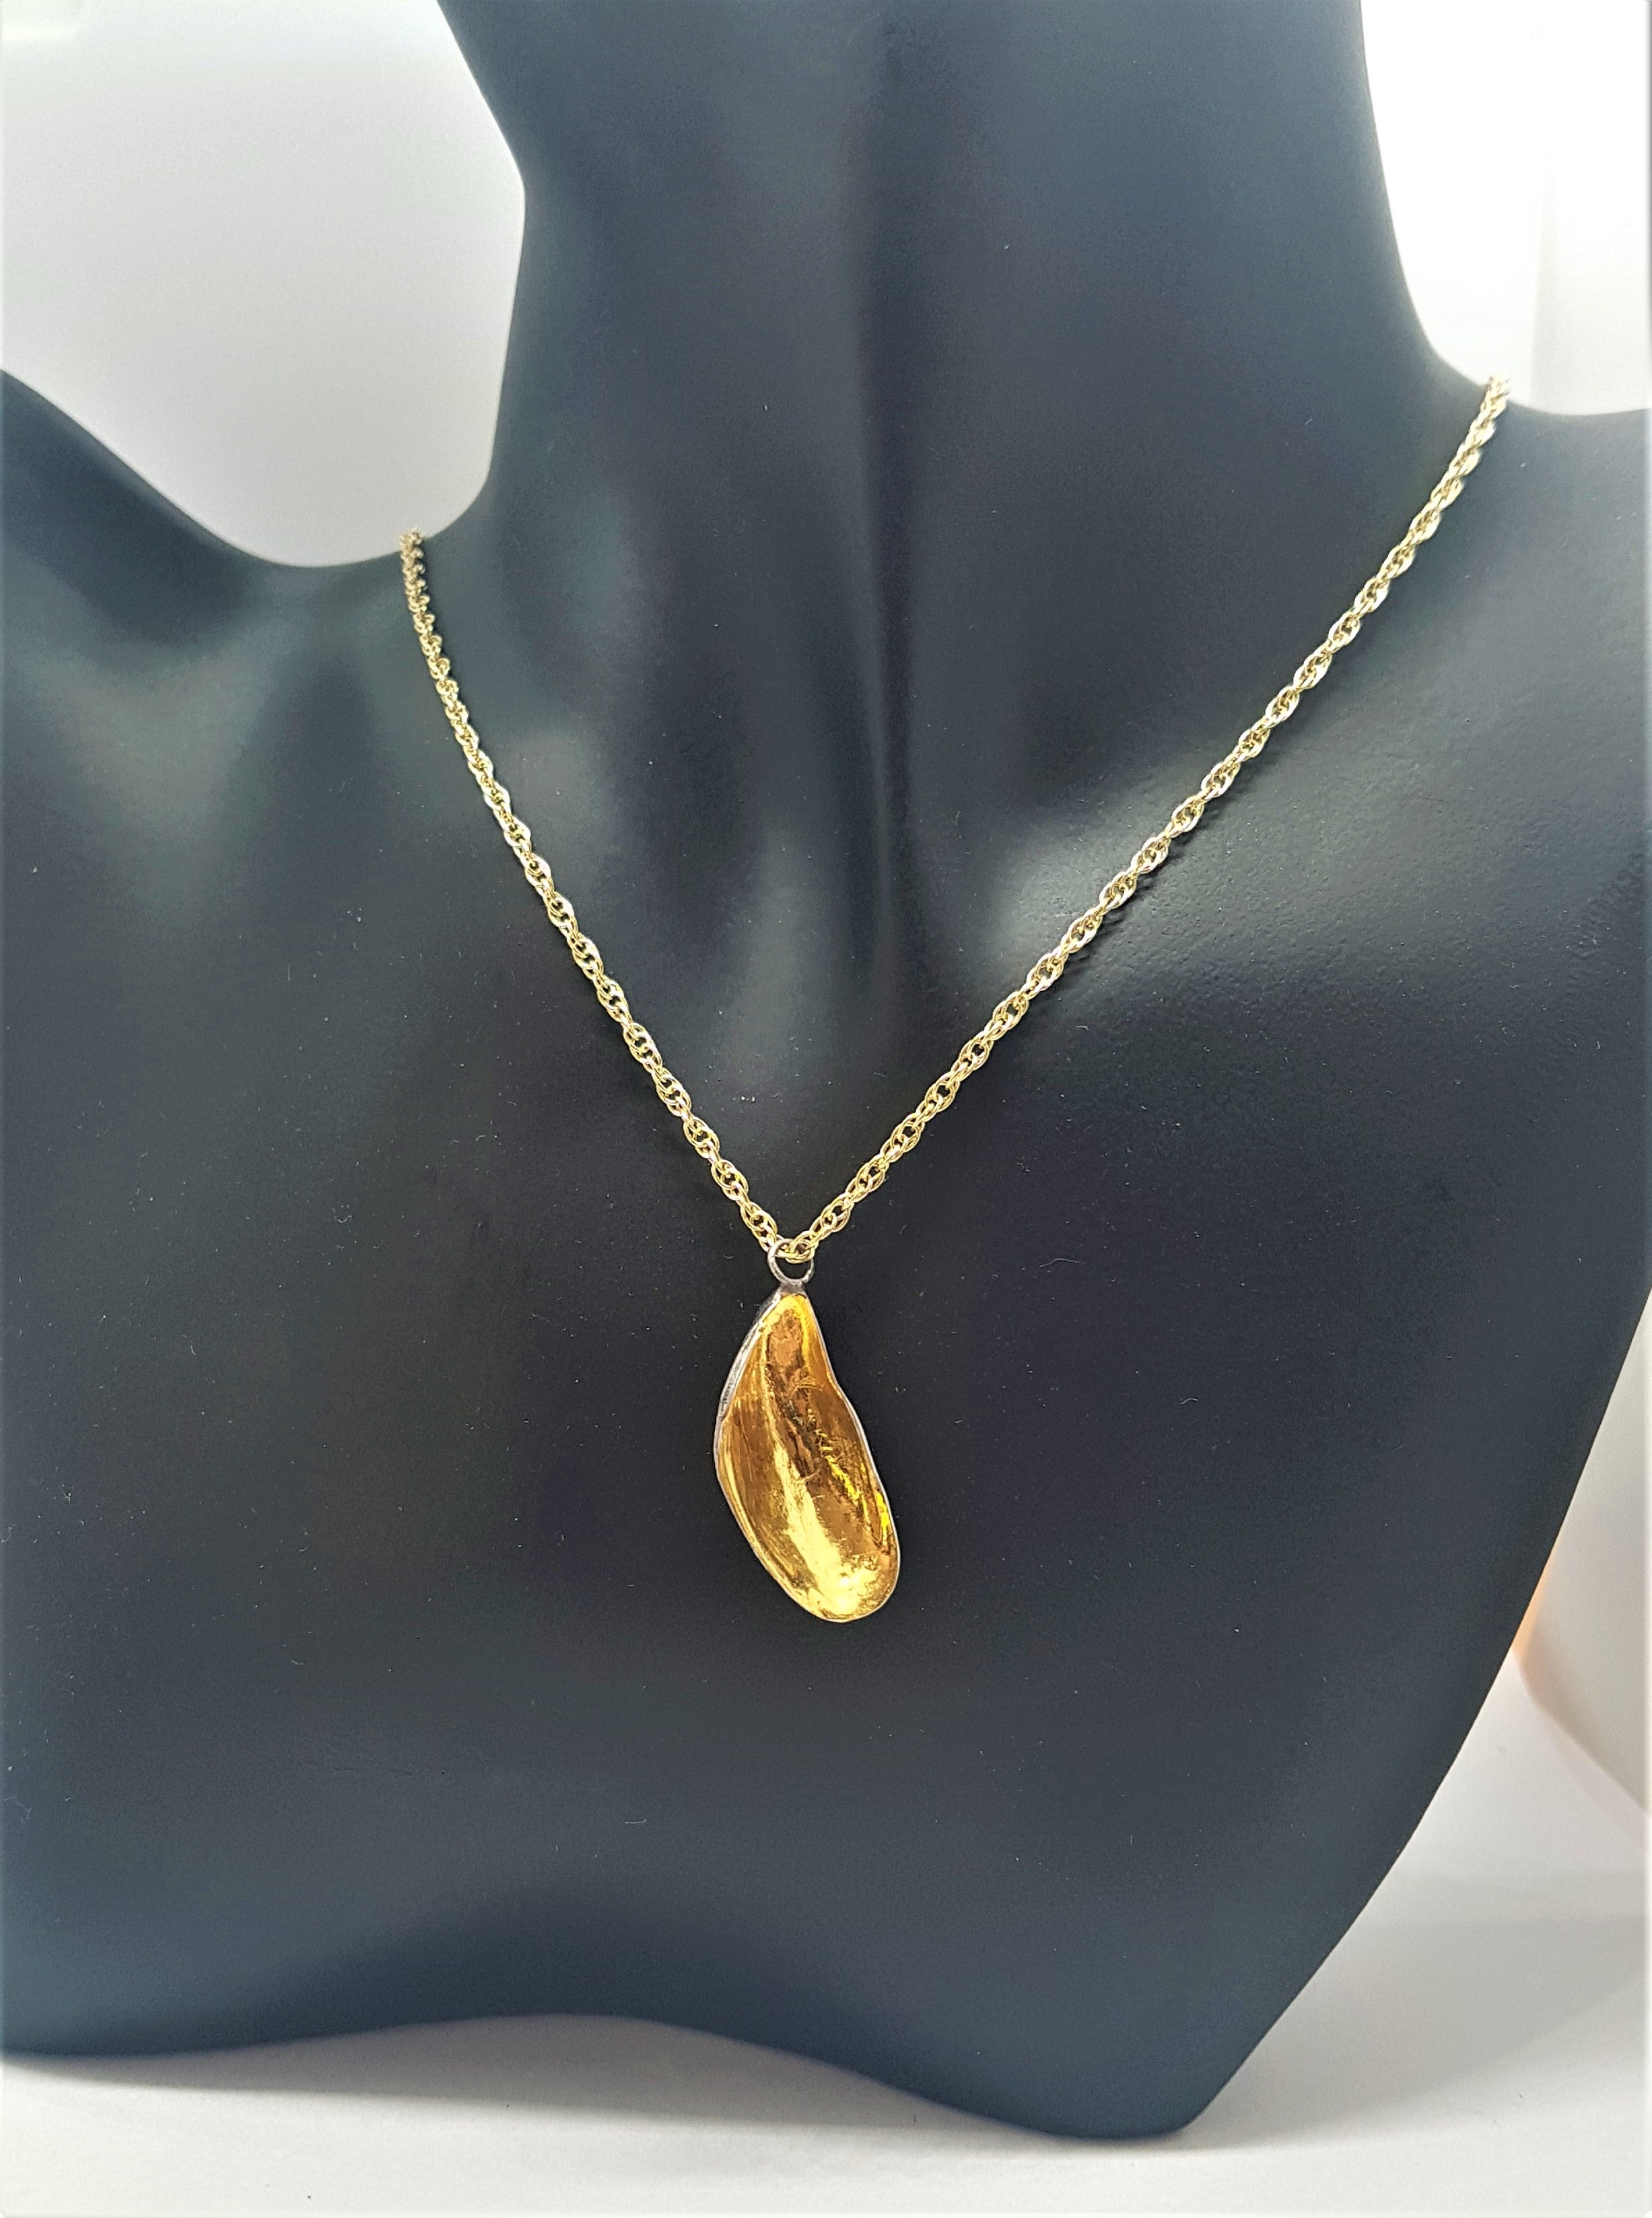 Mussel Shell Necklace - Gold and Black